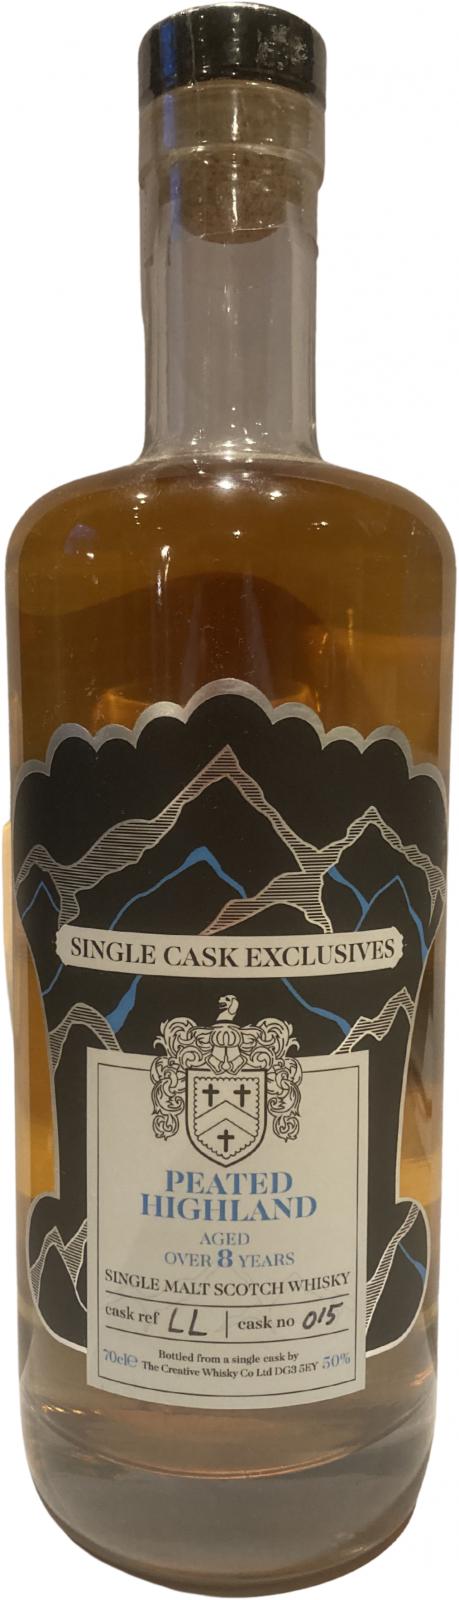 Peated Highland LL015 CWC Single Cask Exclusives 50% 700ml